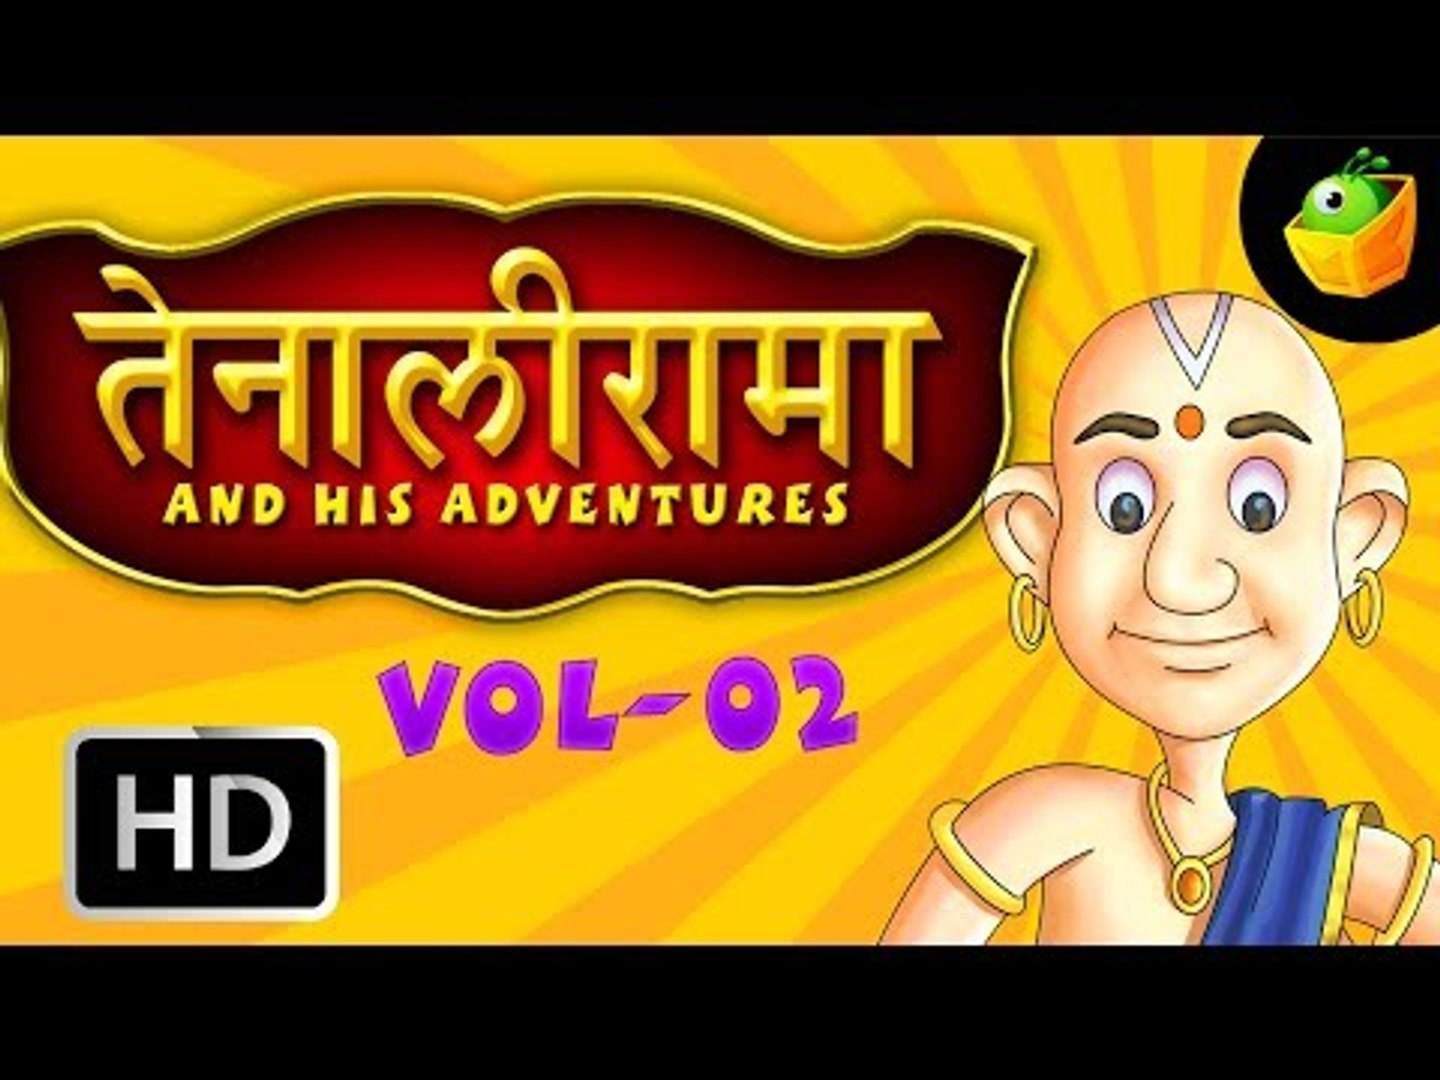 Tenali Raman Full Stories Vol 2 In Hindi (HD) - Compilation of Cartoon/ Animated Stories For Kids - video Dailymotion